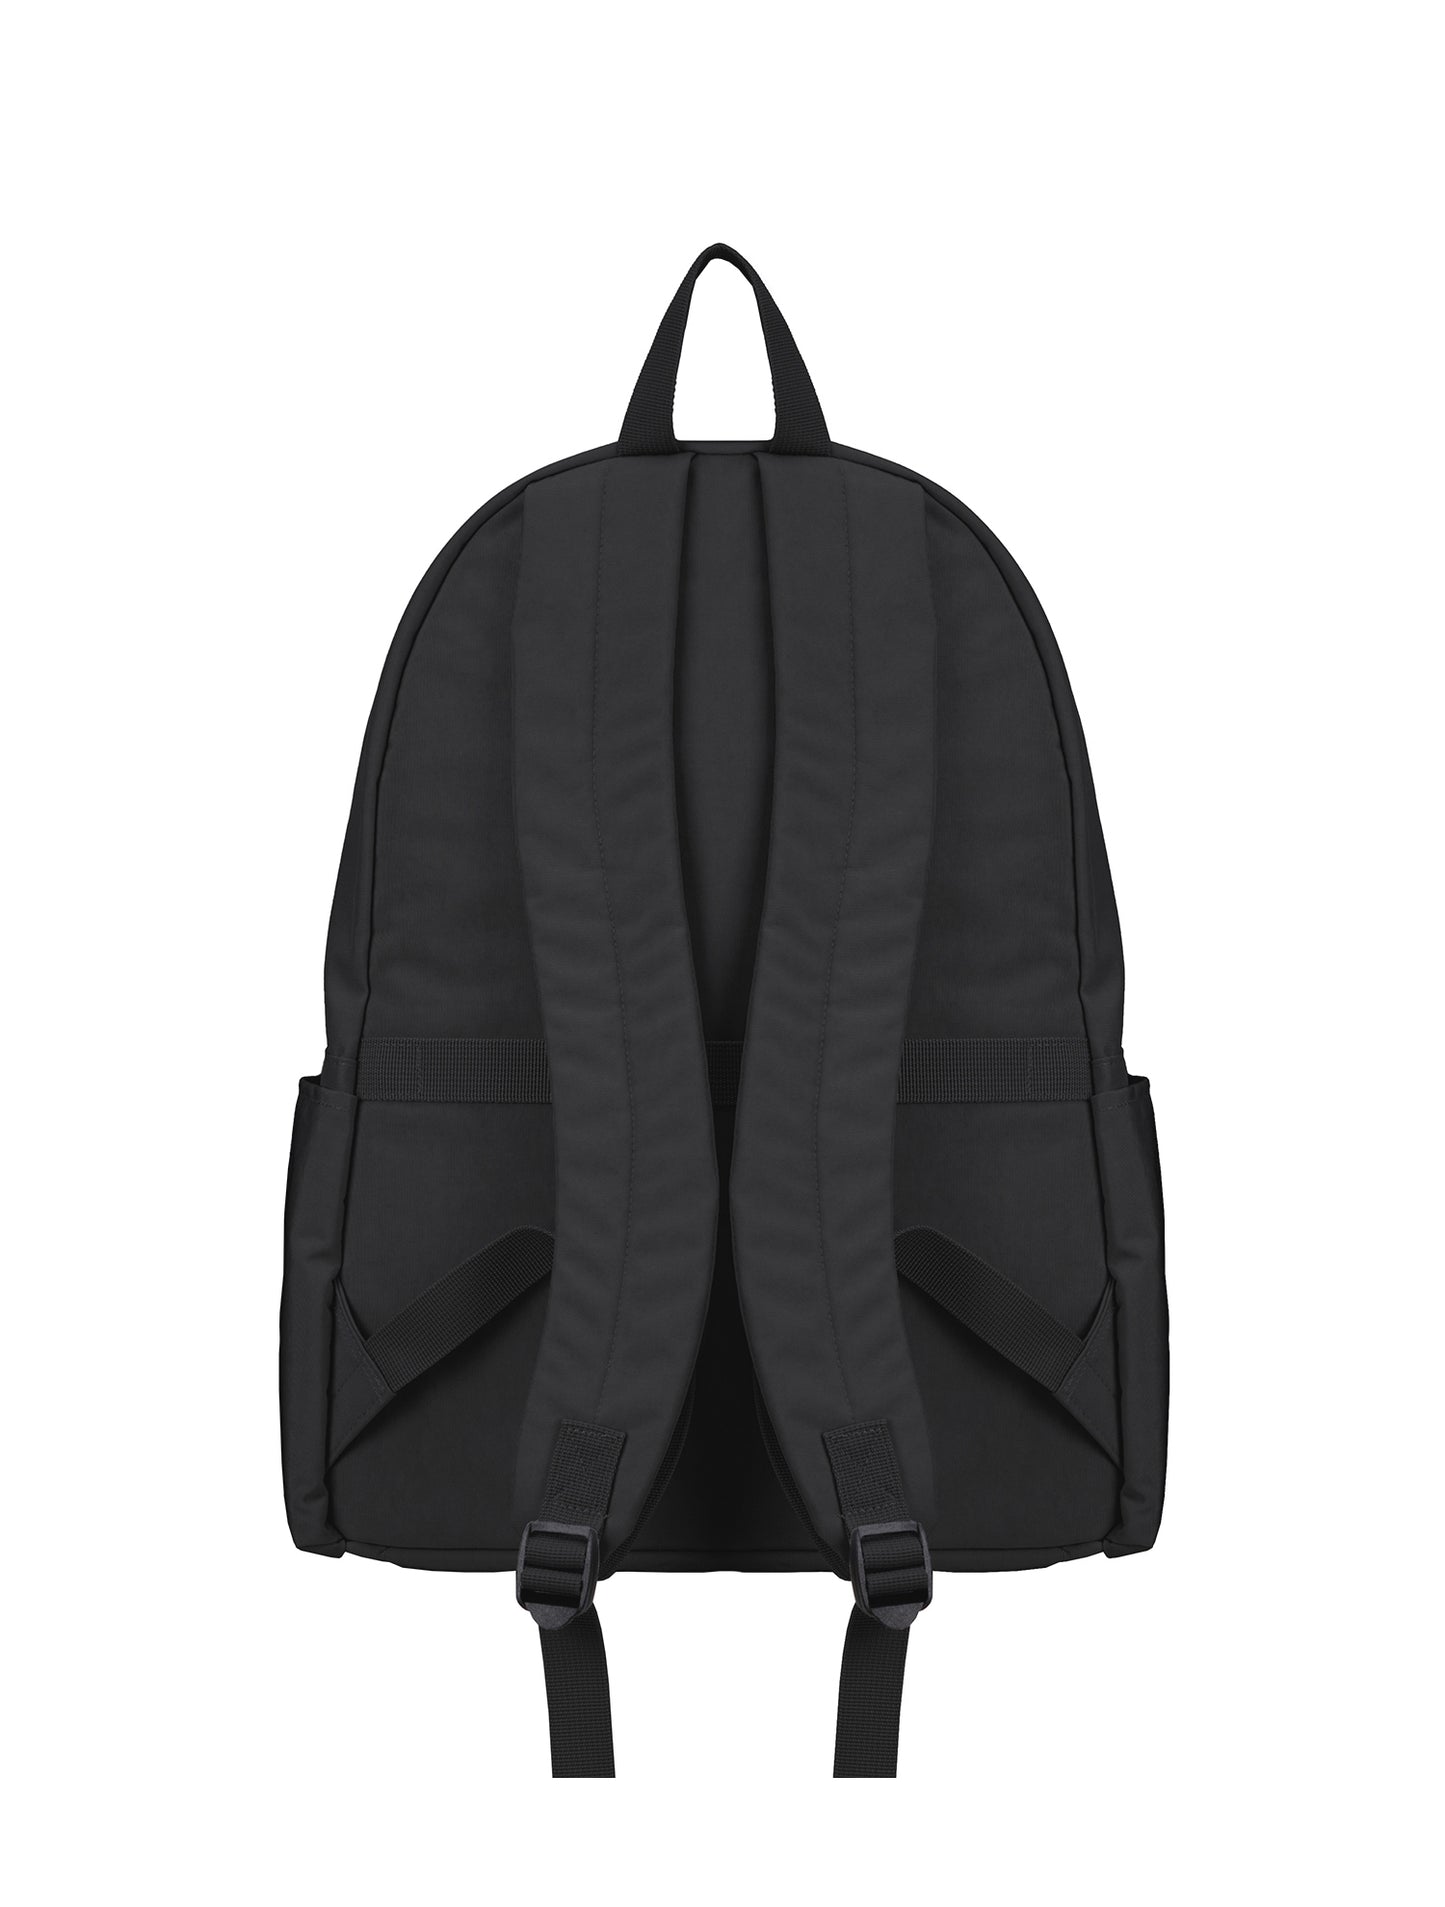 TUO - KAI BACKPACK BLACK